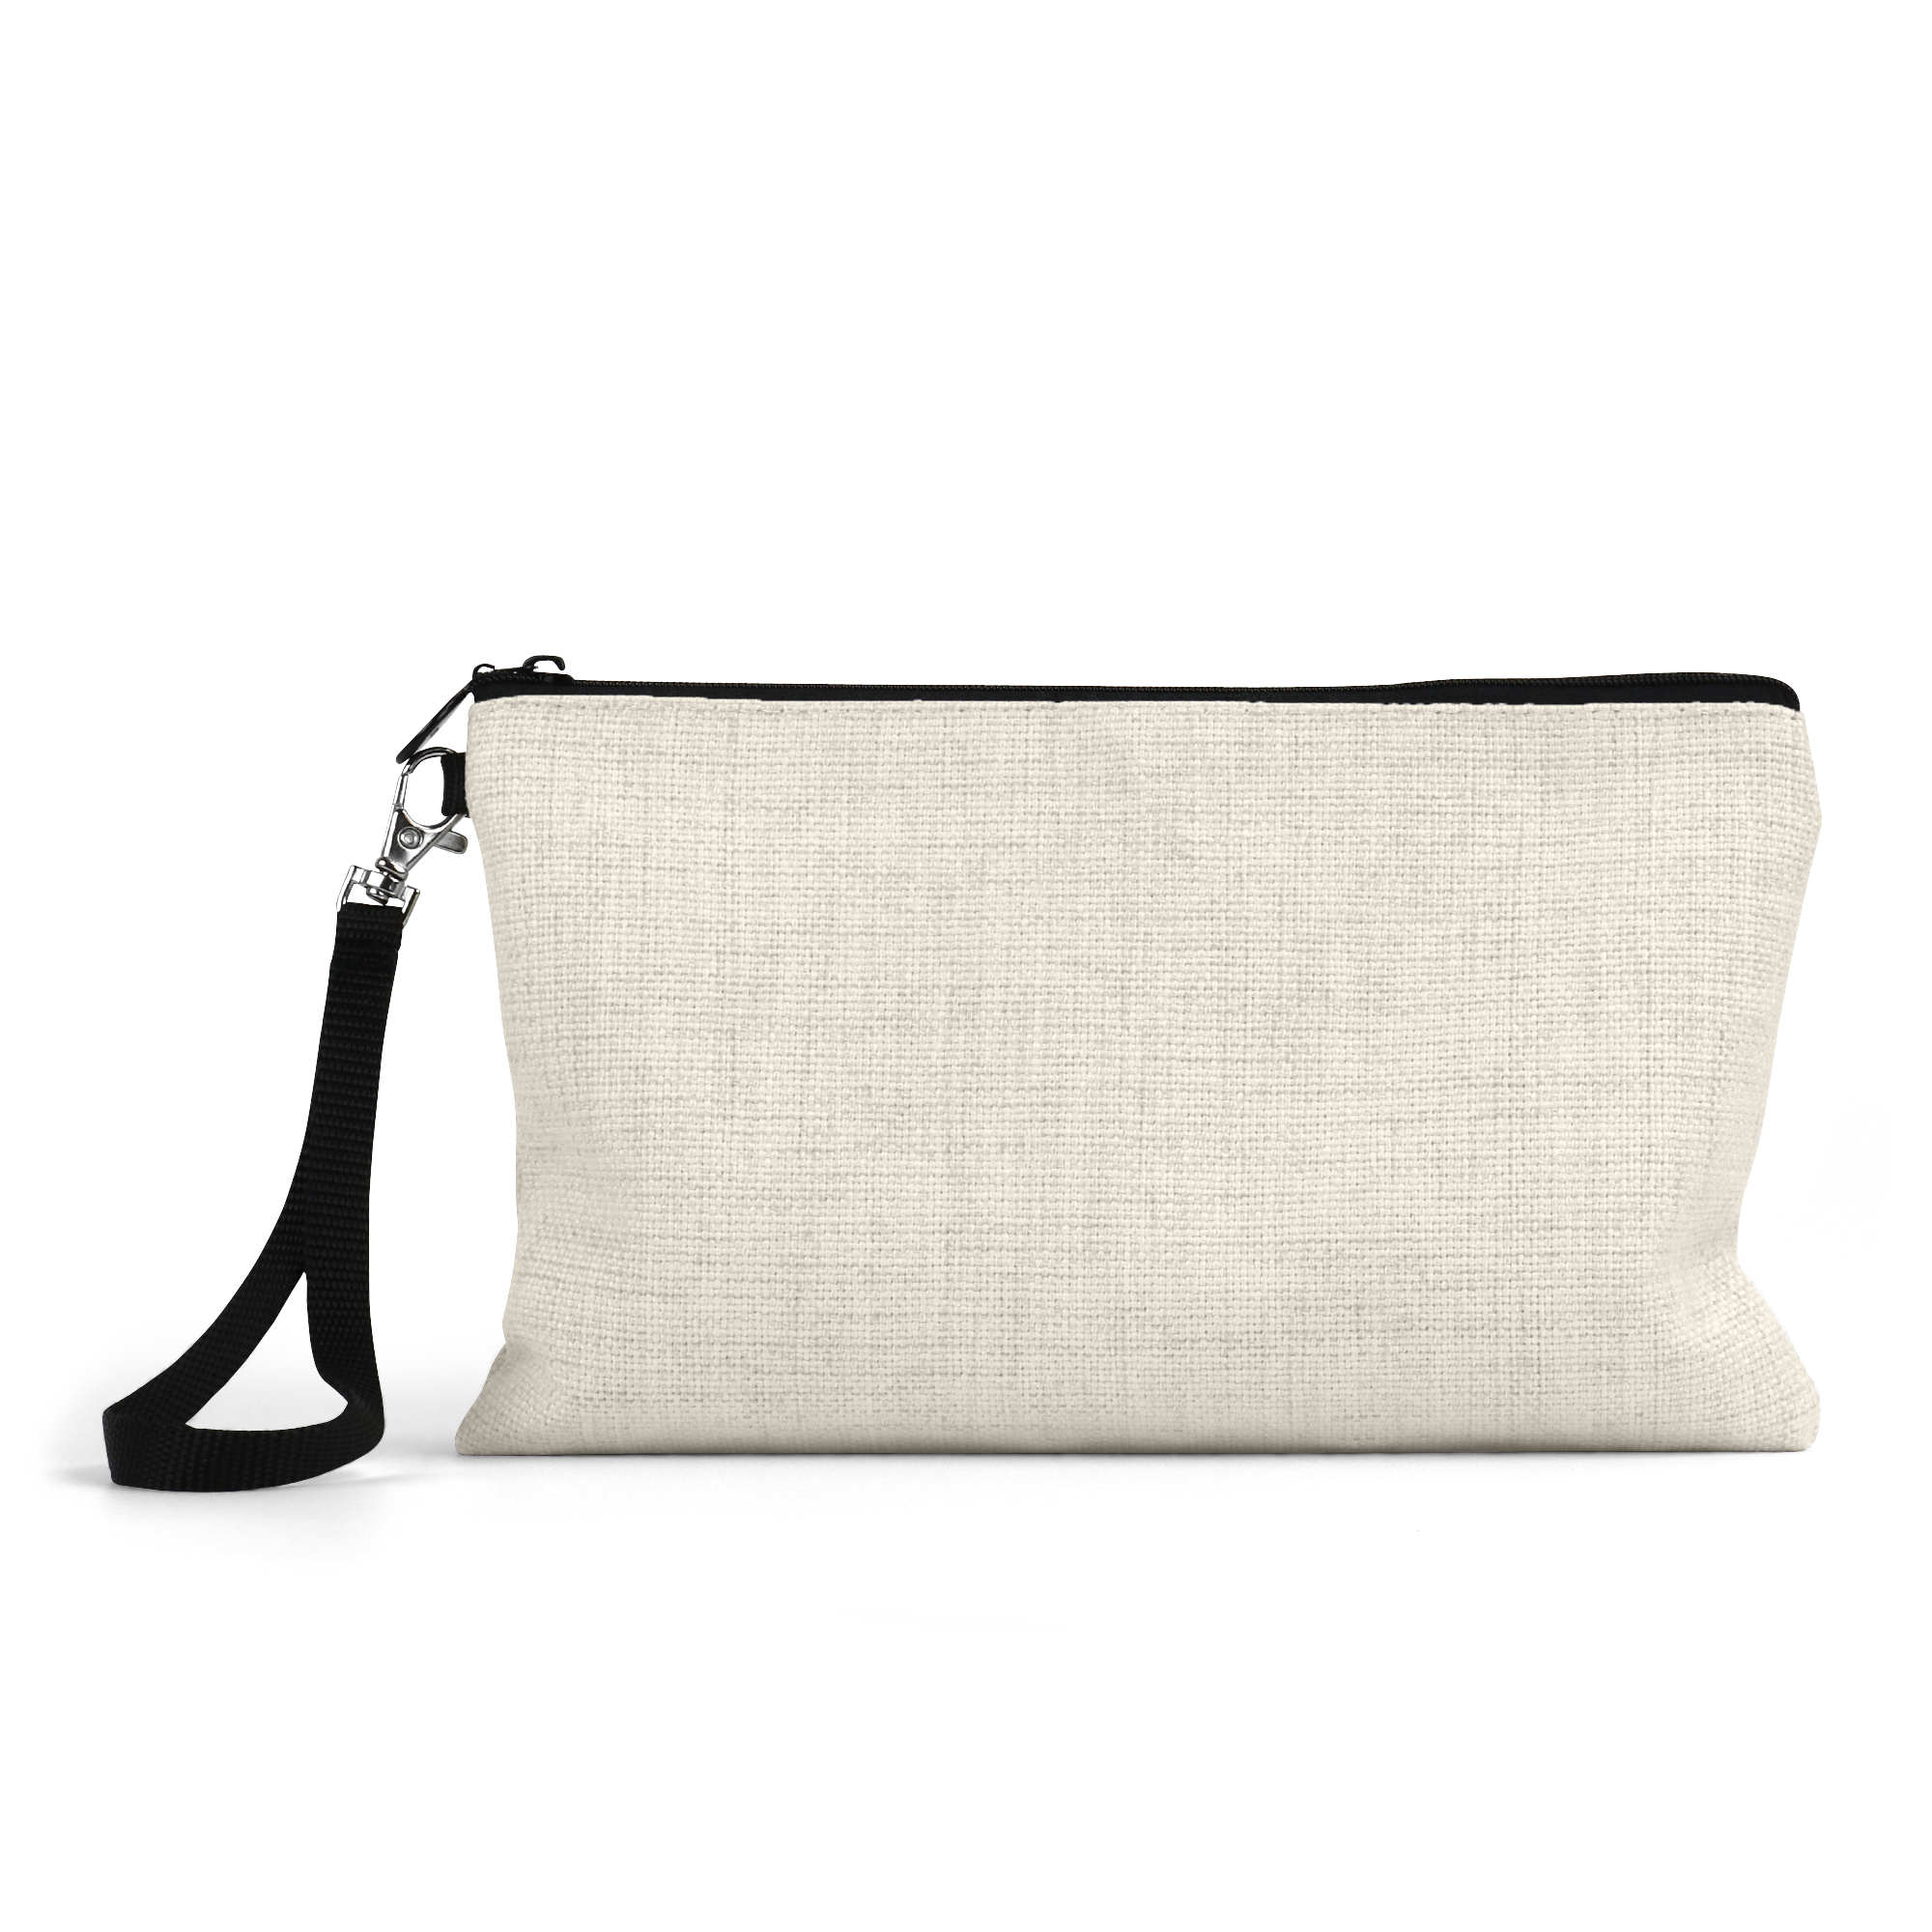 Blank/Customizable Linen Zippered Bag with Strap